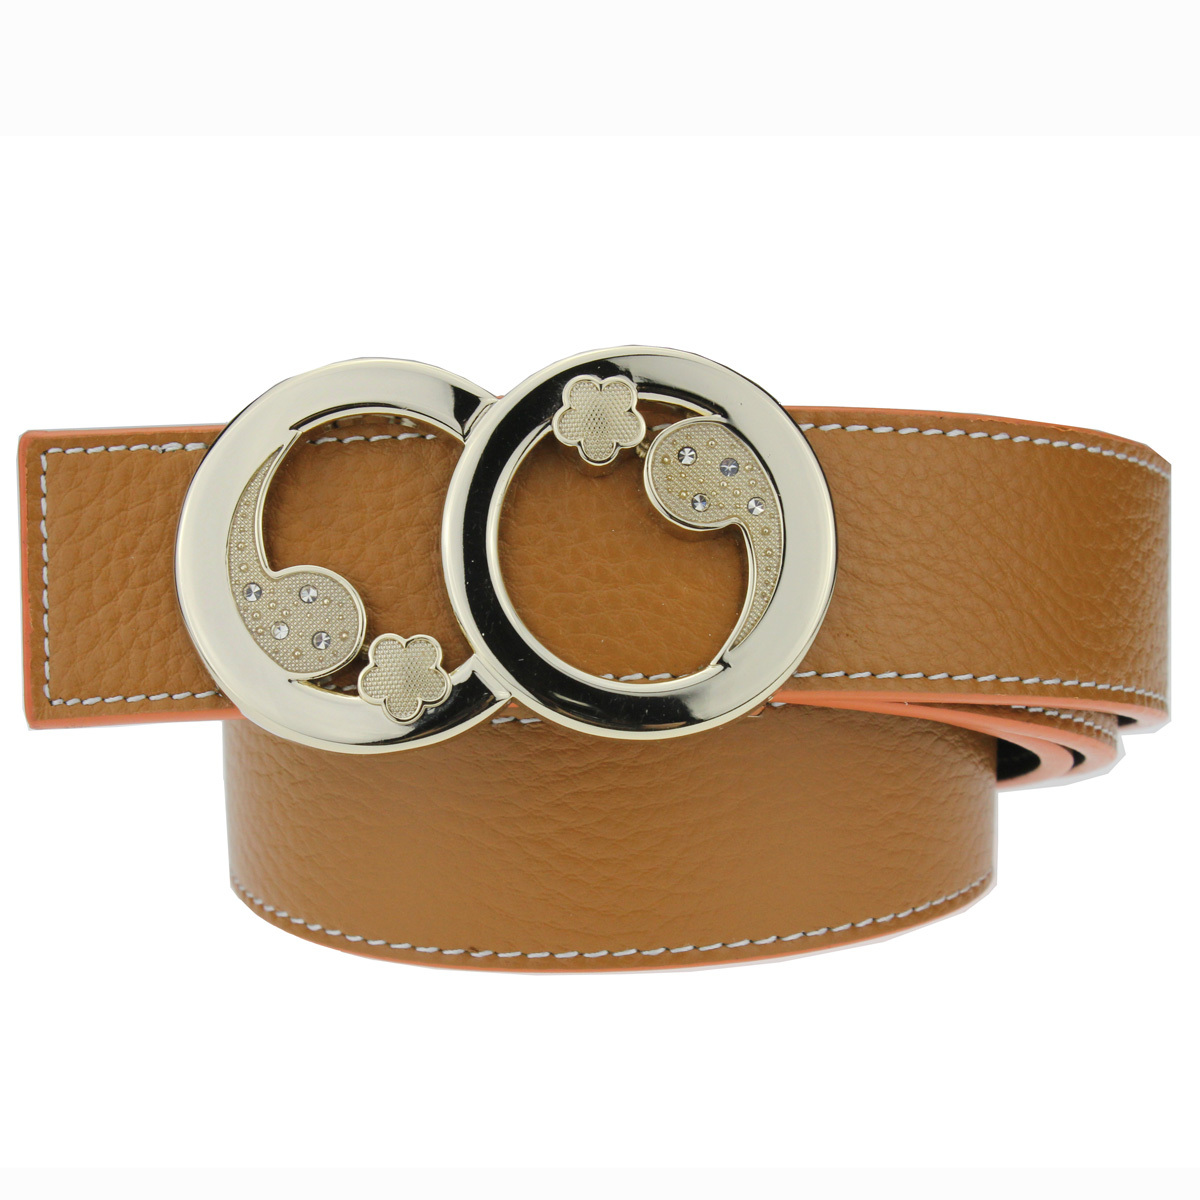 Belle strap women's genuine leather belt female fashion ladies smooth buckle first layer of cowhide double faced buckle